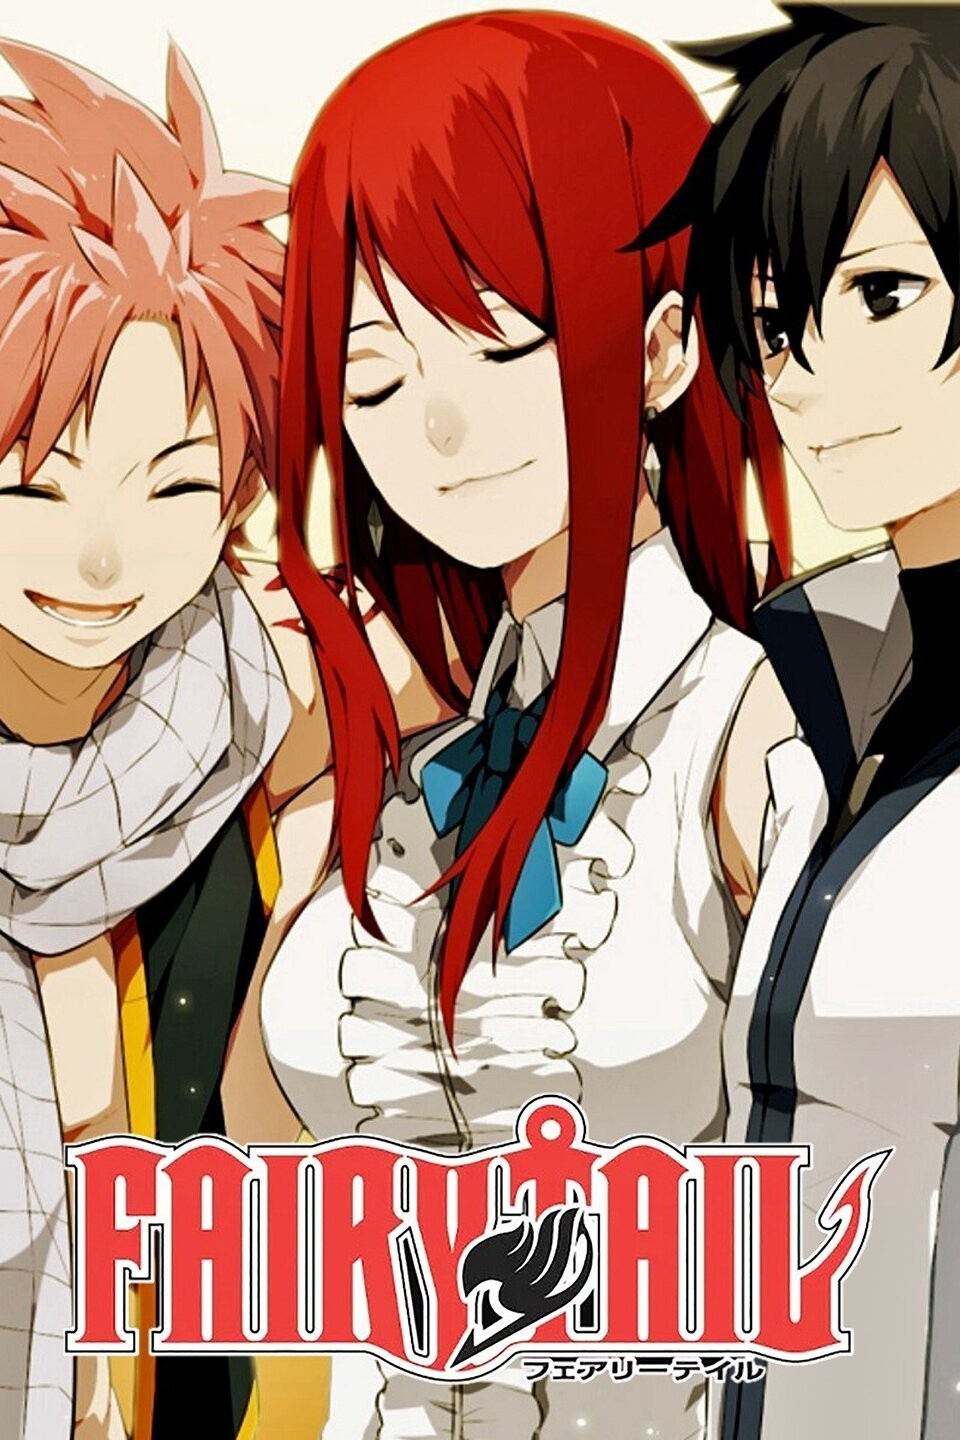 Review – Fairy Tail 2014 (Series 2) – Surreal Resolution